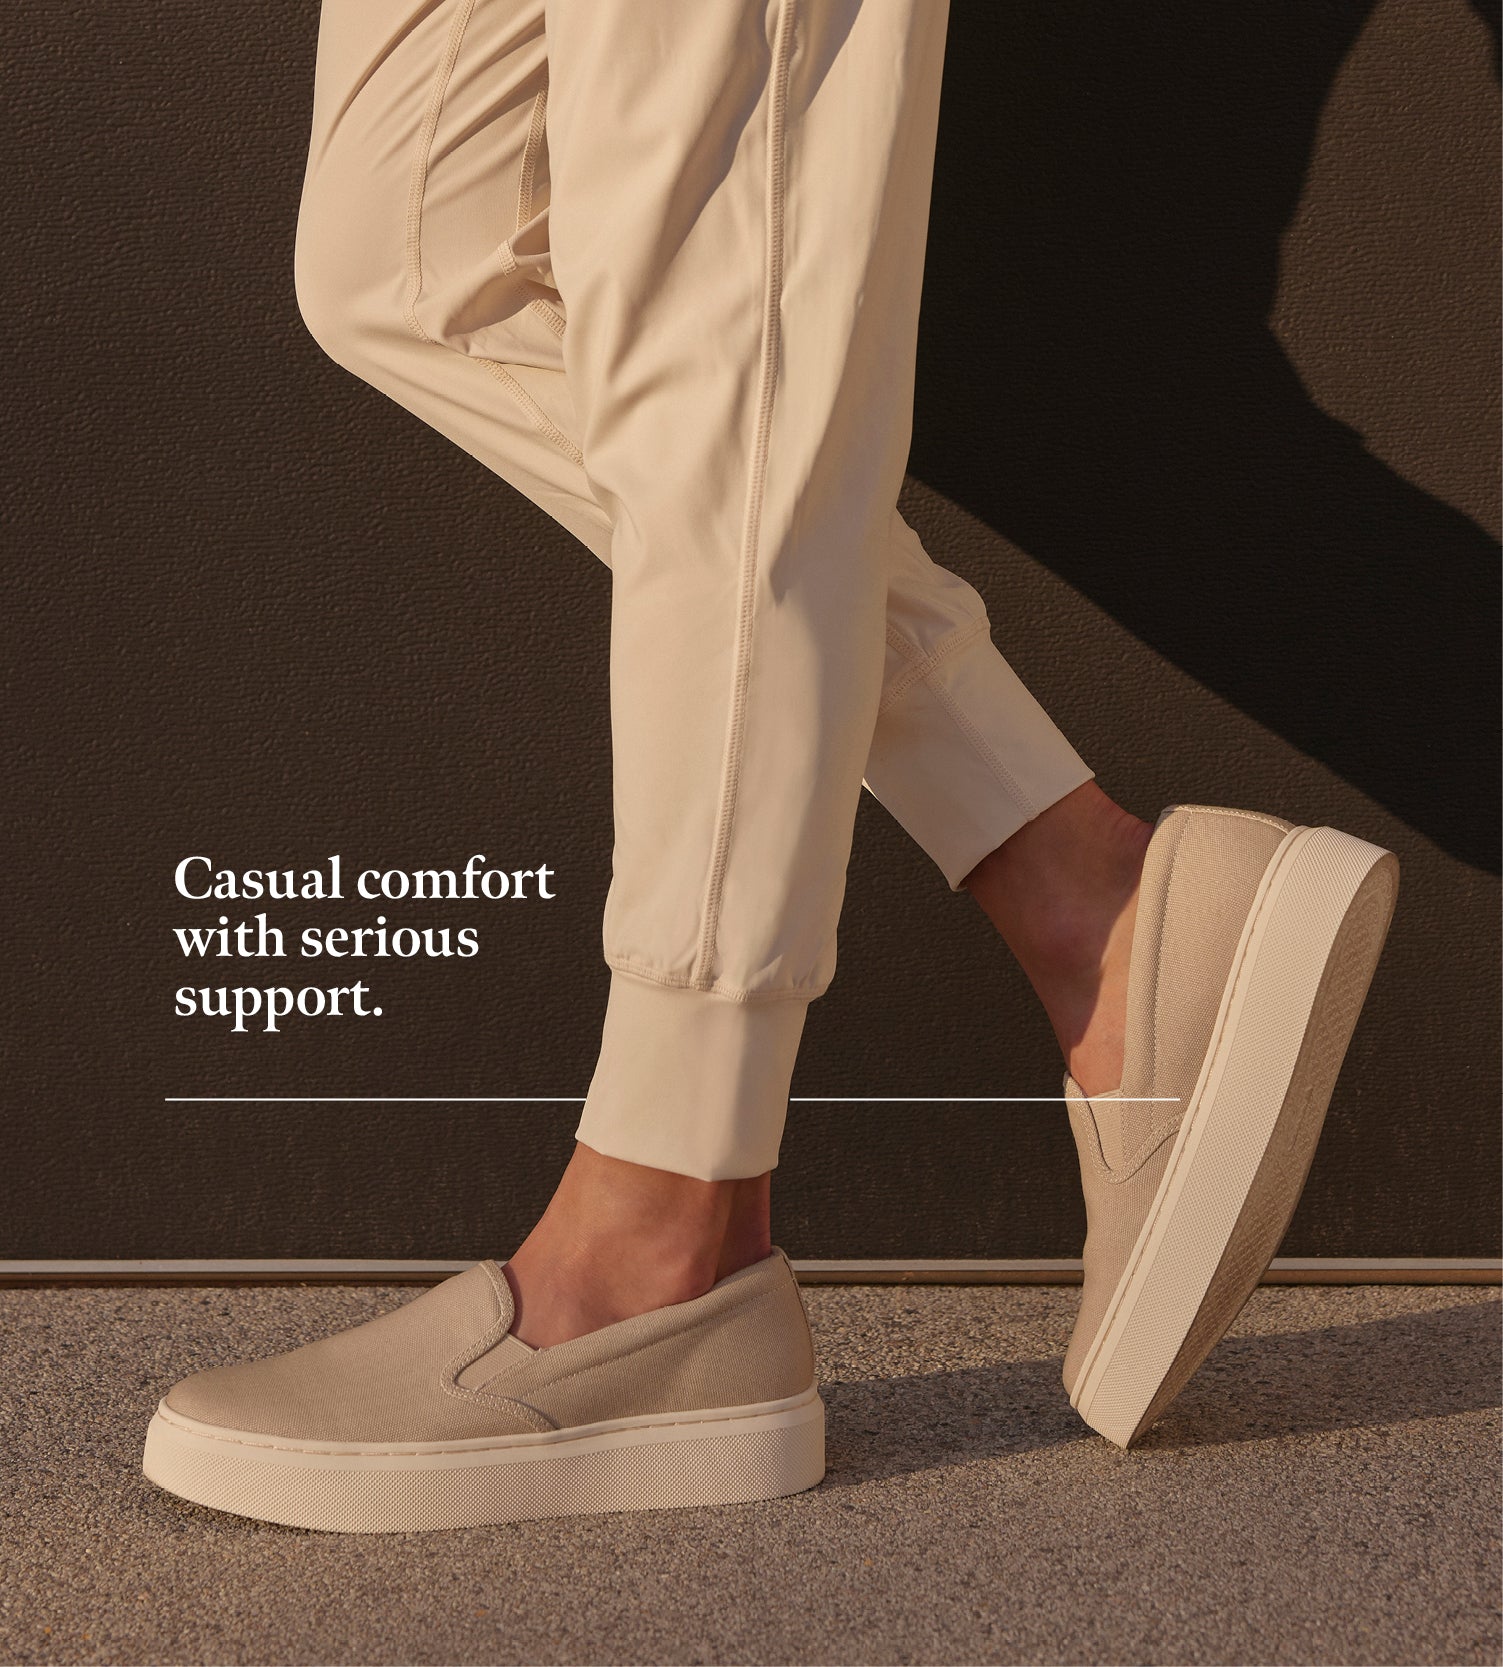 Casual comfort with serious support.